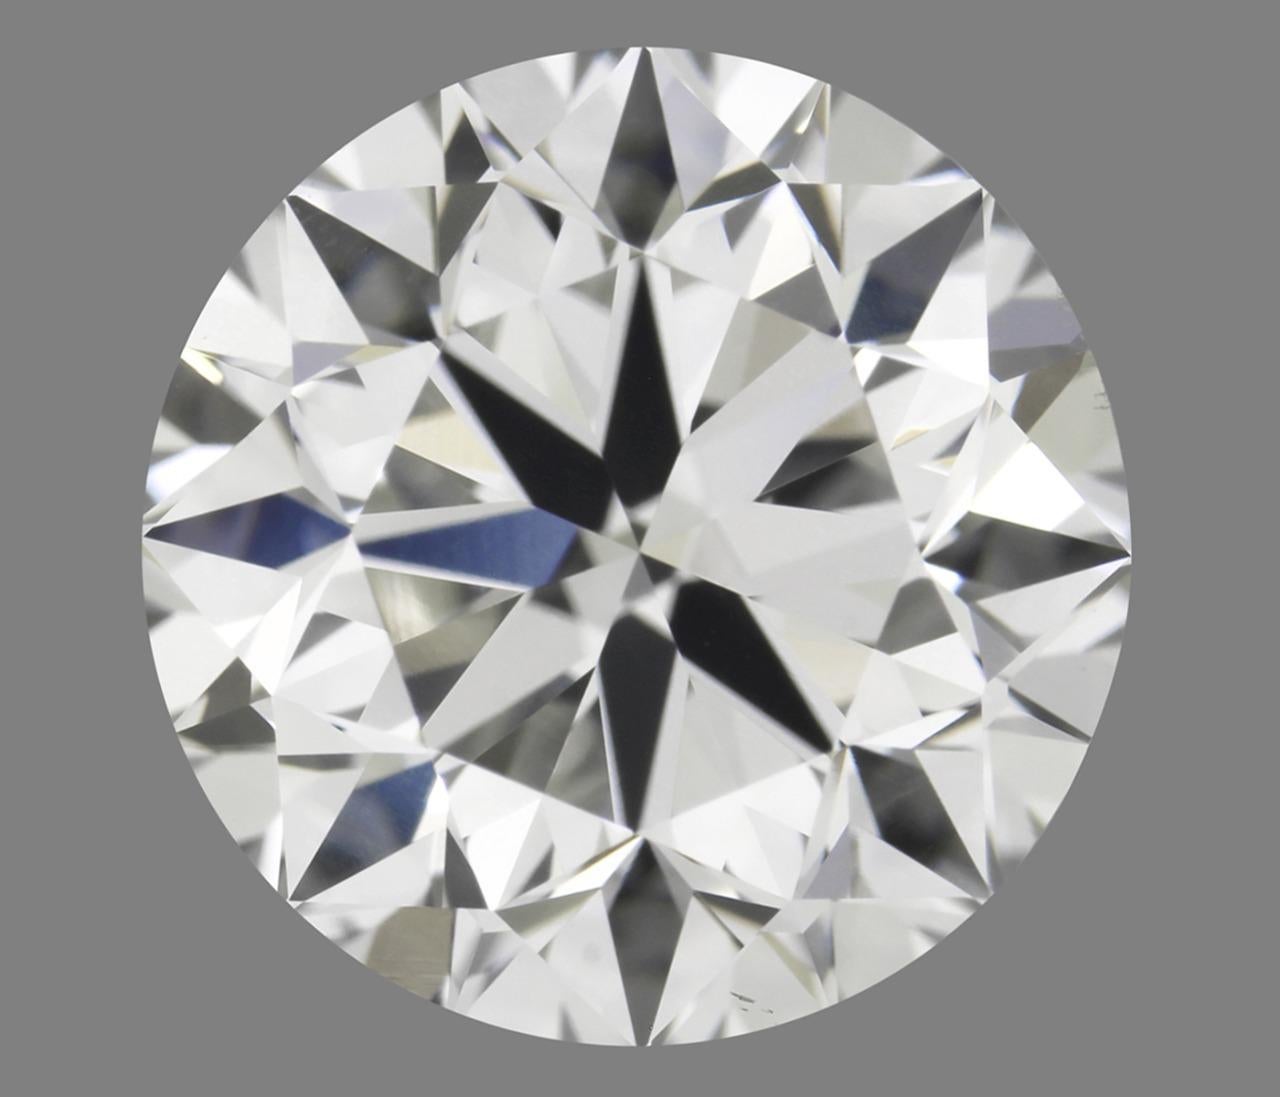 GIA Certified 0.50 Carat, D/VVS1, Brilliant Cut, Excellent Natural Diamond

Perfect Brilliants for perfect gifts.

5 C's:
Certificate: GIA
Carat: 0.50ct
Color: D
Clarity: VVS1(Very Very Slightly Included)
Cut: Excellent

Polish: Excellent
Symmetry: